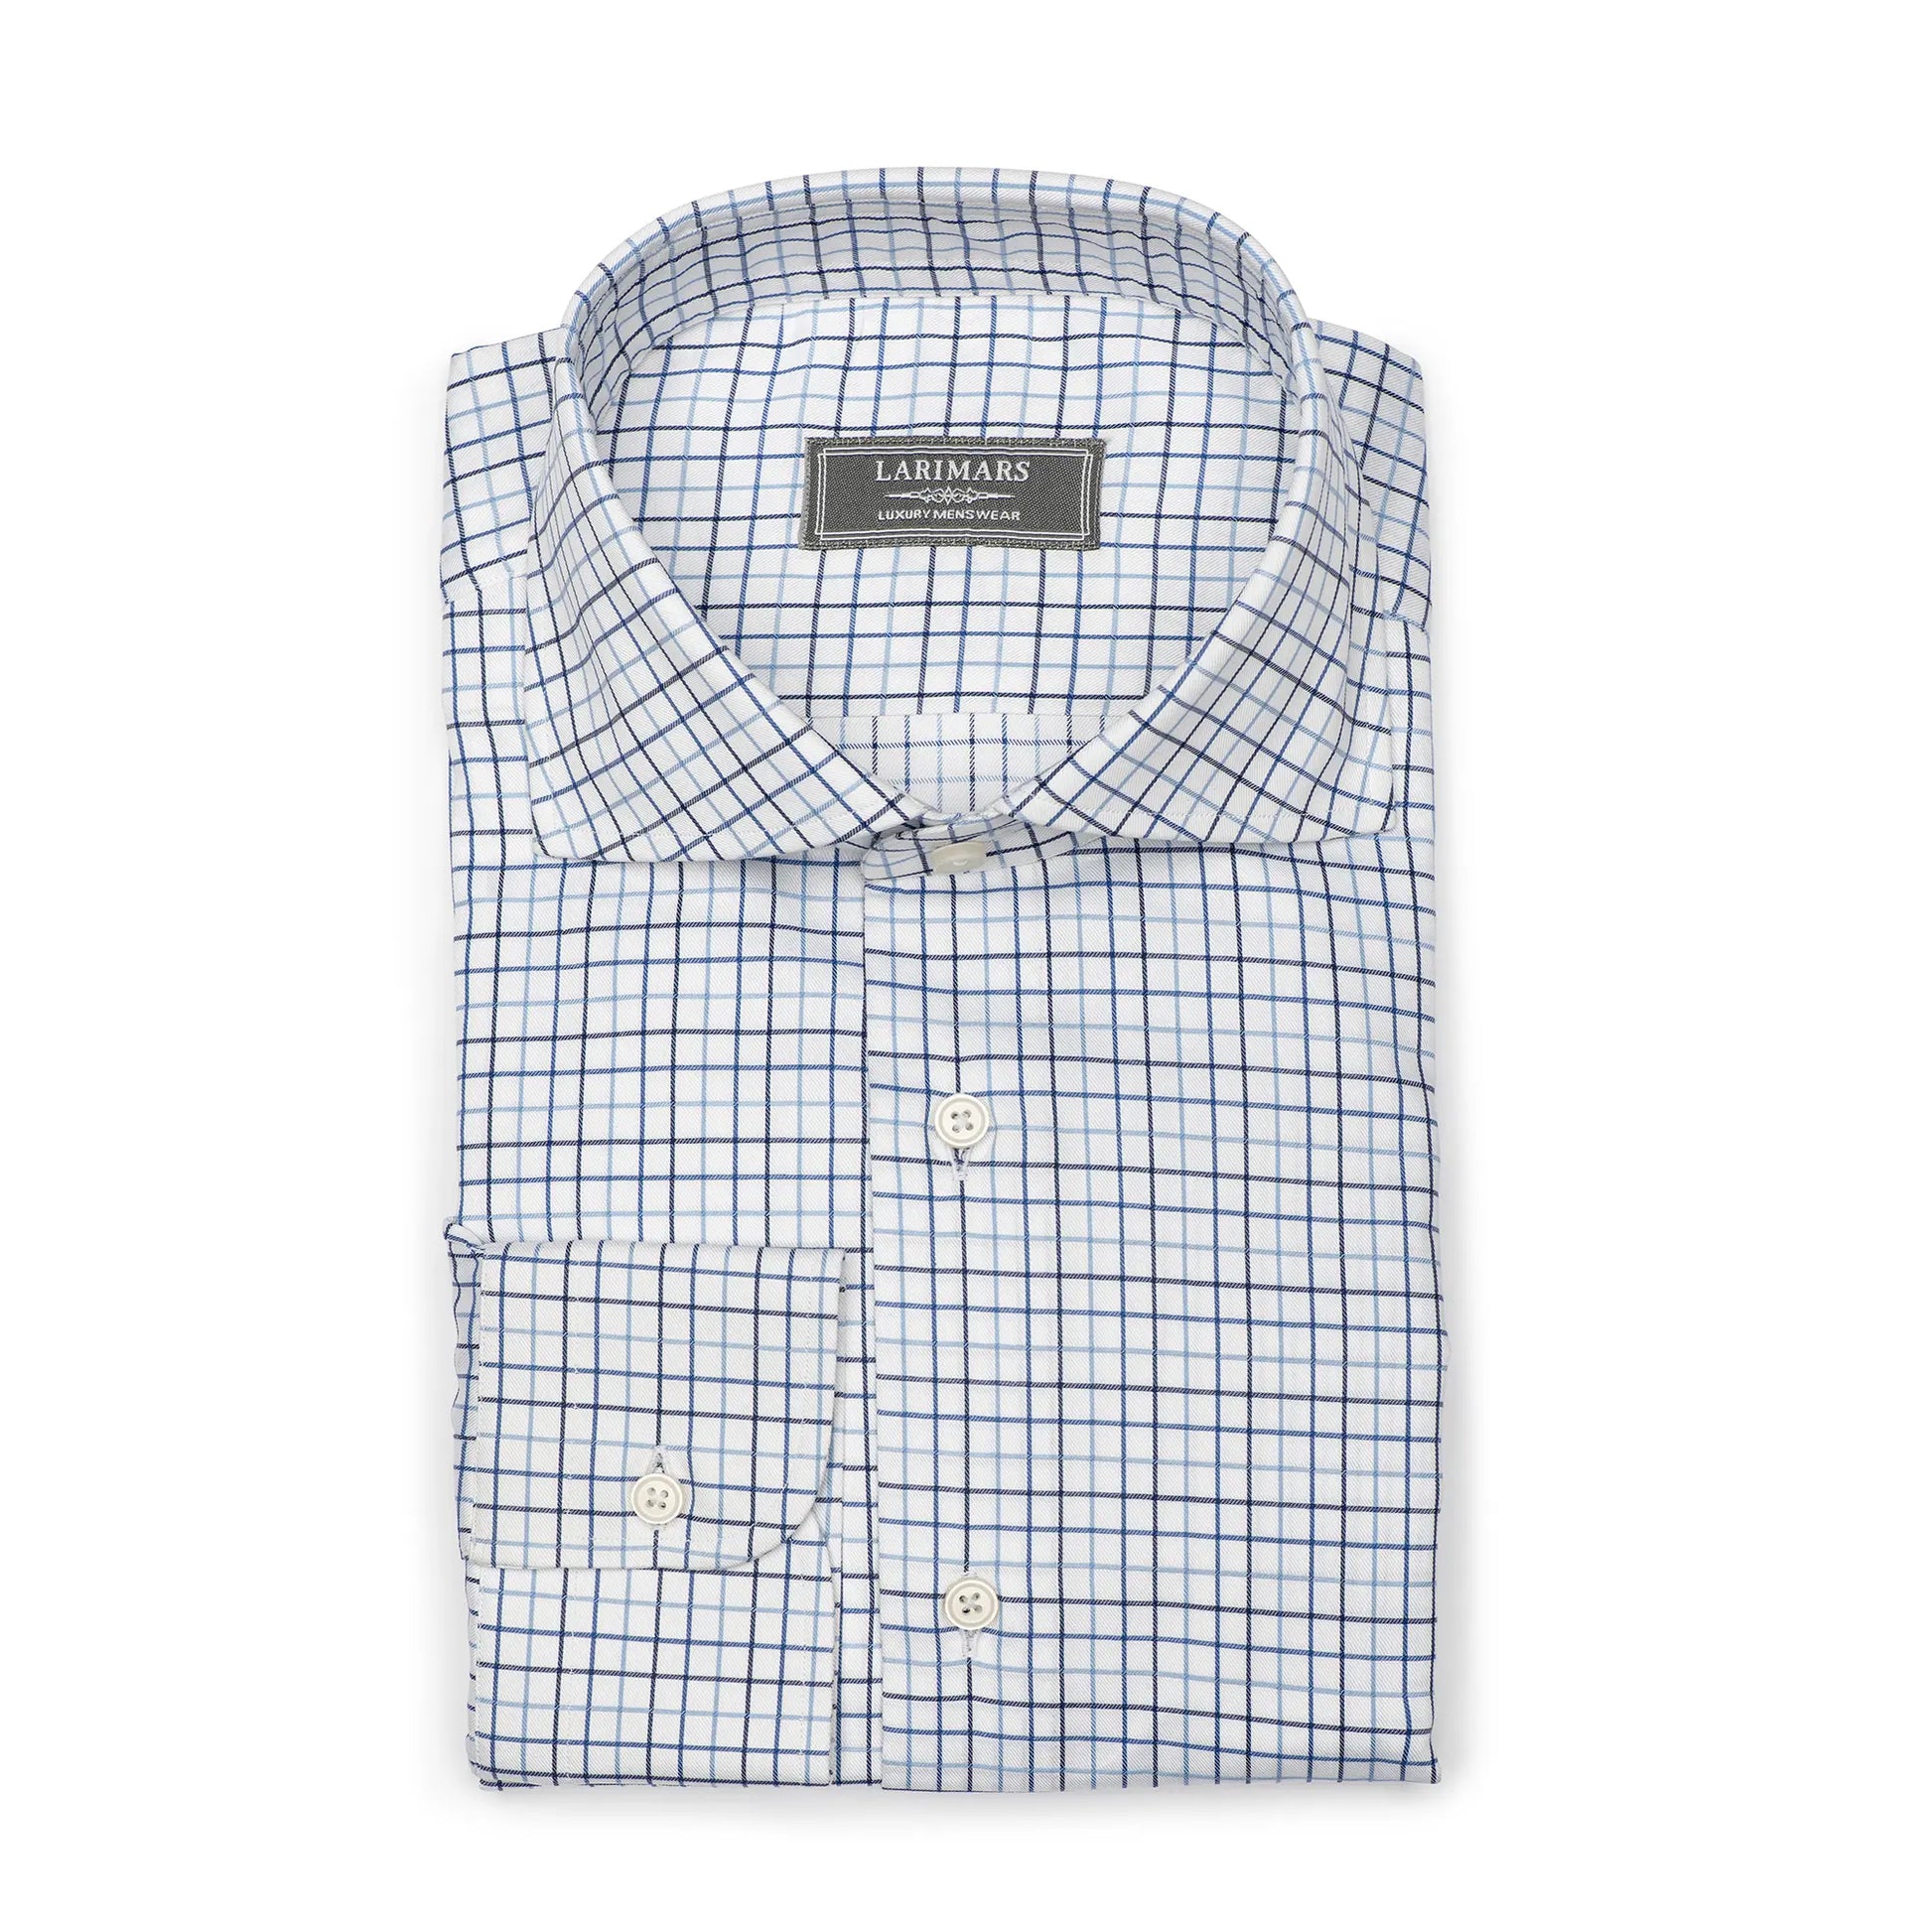 Blue Tattersall - Larimars Clothing Men's Formal and casual wear shirts